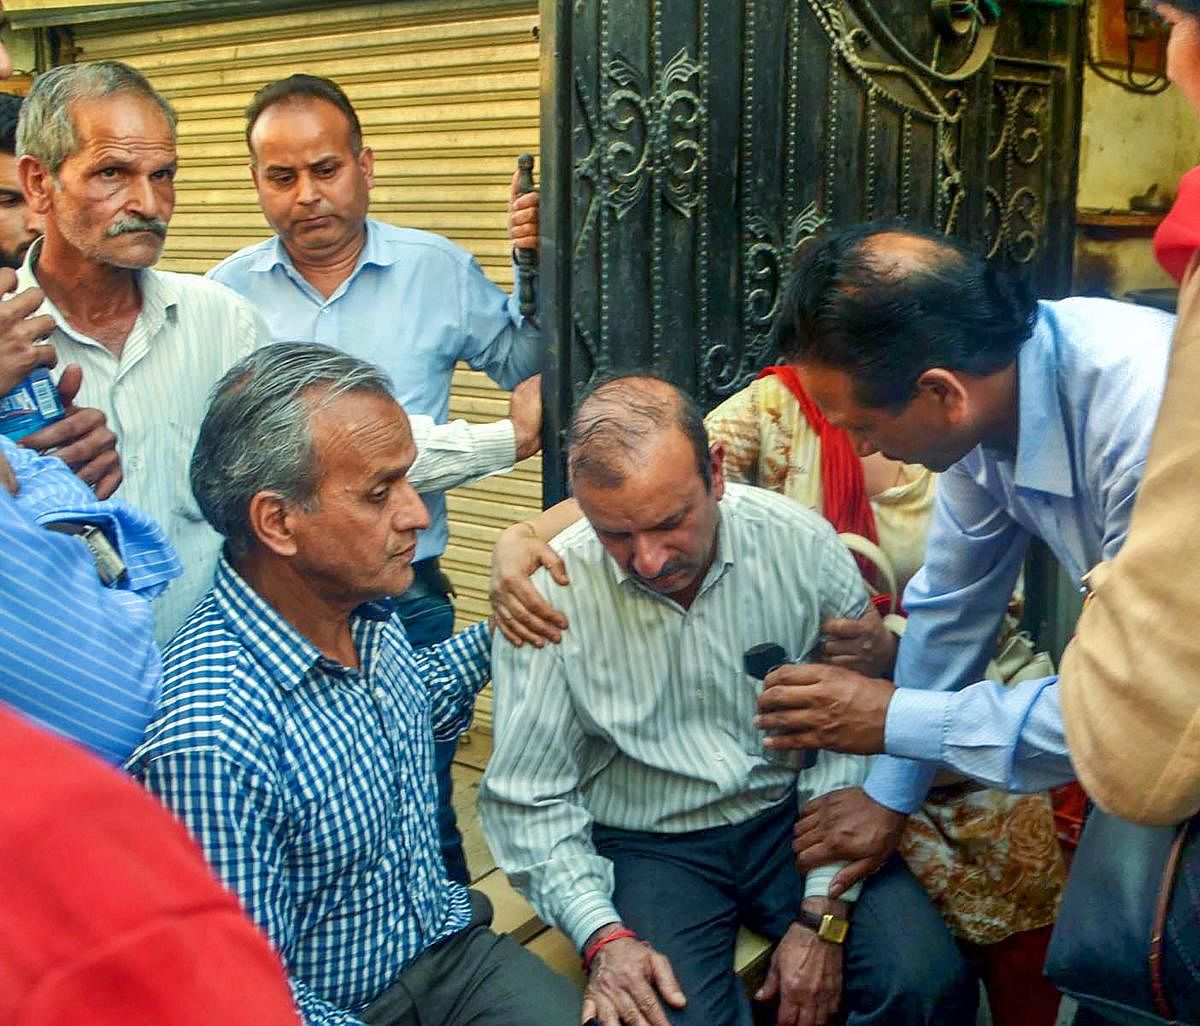 Husband of officer Shail Bala Sharma mourns after she was allegedly shot dead by a hotel owner in Kasauli town, where Sharma had yesterday gone to supervise the demolition of unauthorised construction, in Mandi on Wednesday. PTI Photo